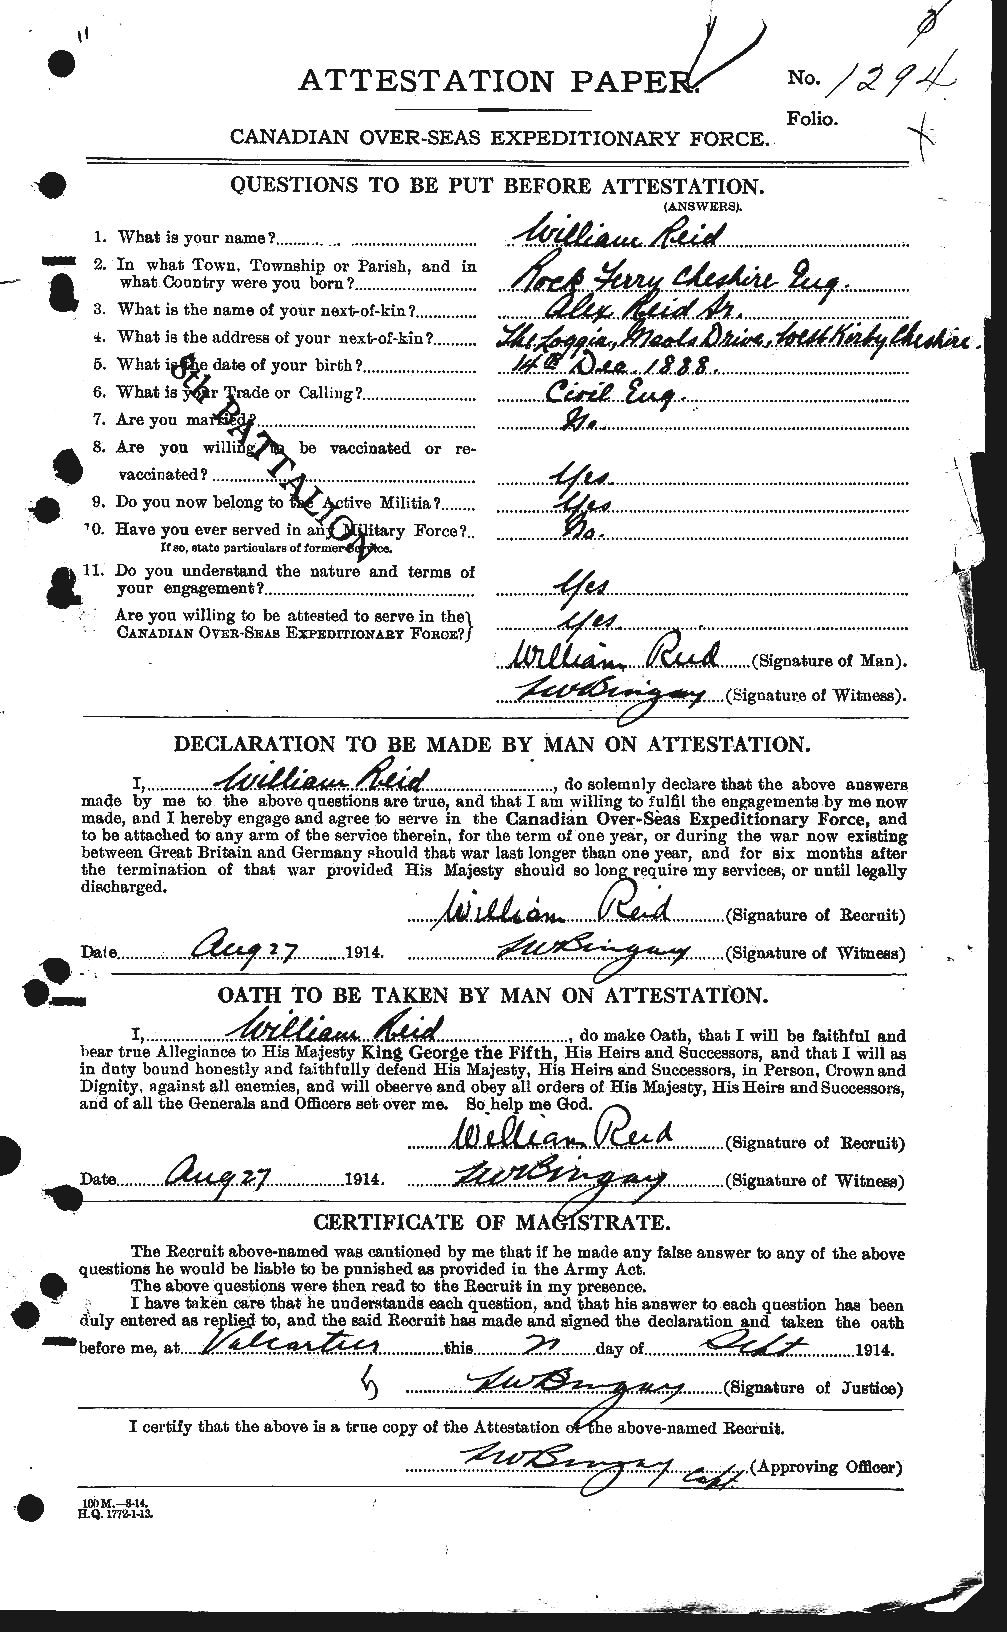 Personnel Records of the First World War - CEF 596933a